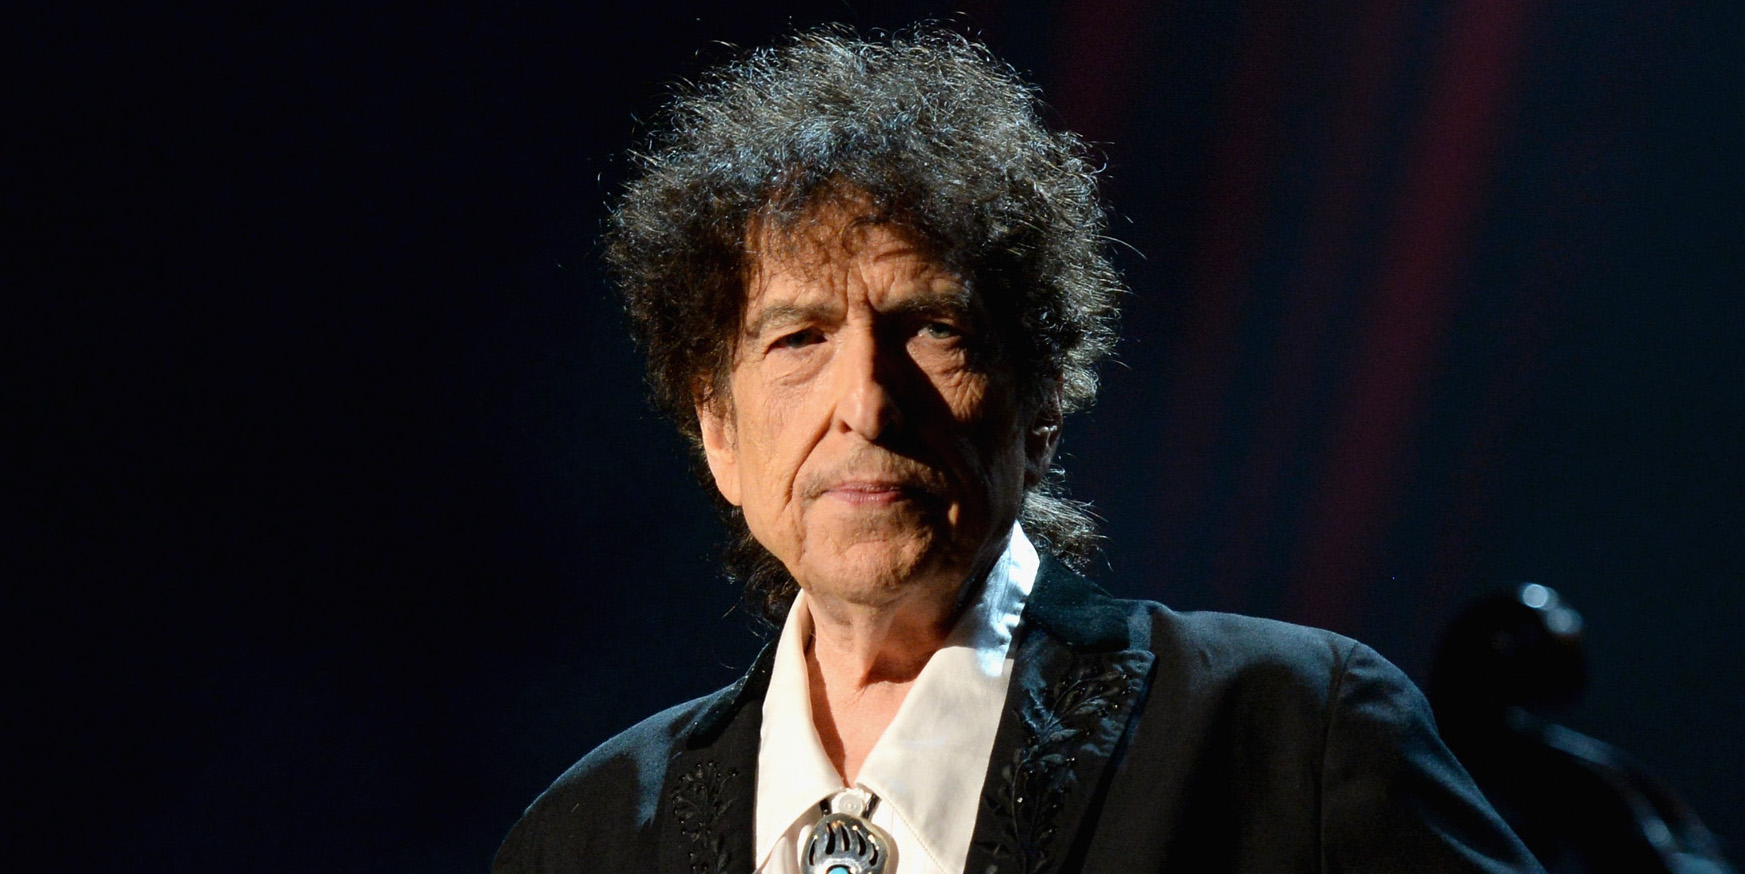 onstage at the 25th anniversary MusiCares 2015 Person Of The Year Gala honoring Bob Dylan at the Los Angeles Convention Center on February 6, 2015 in Los Angeles, California. The annual benefit raises critical funds for MusiCares' Emergency Financial Assistance and Addiction Recovery programs. For more information visit musicares.org.